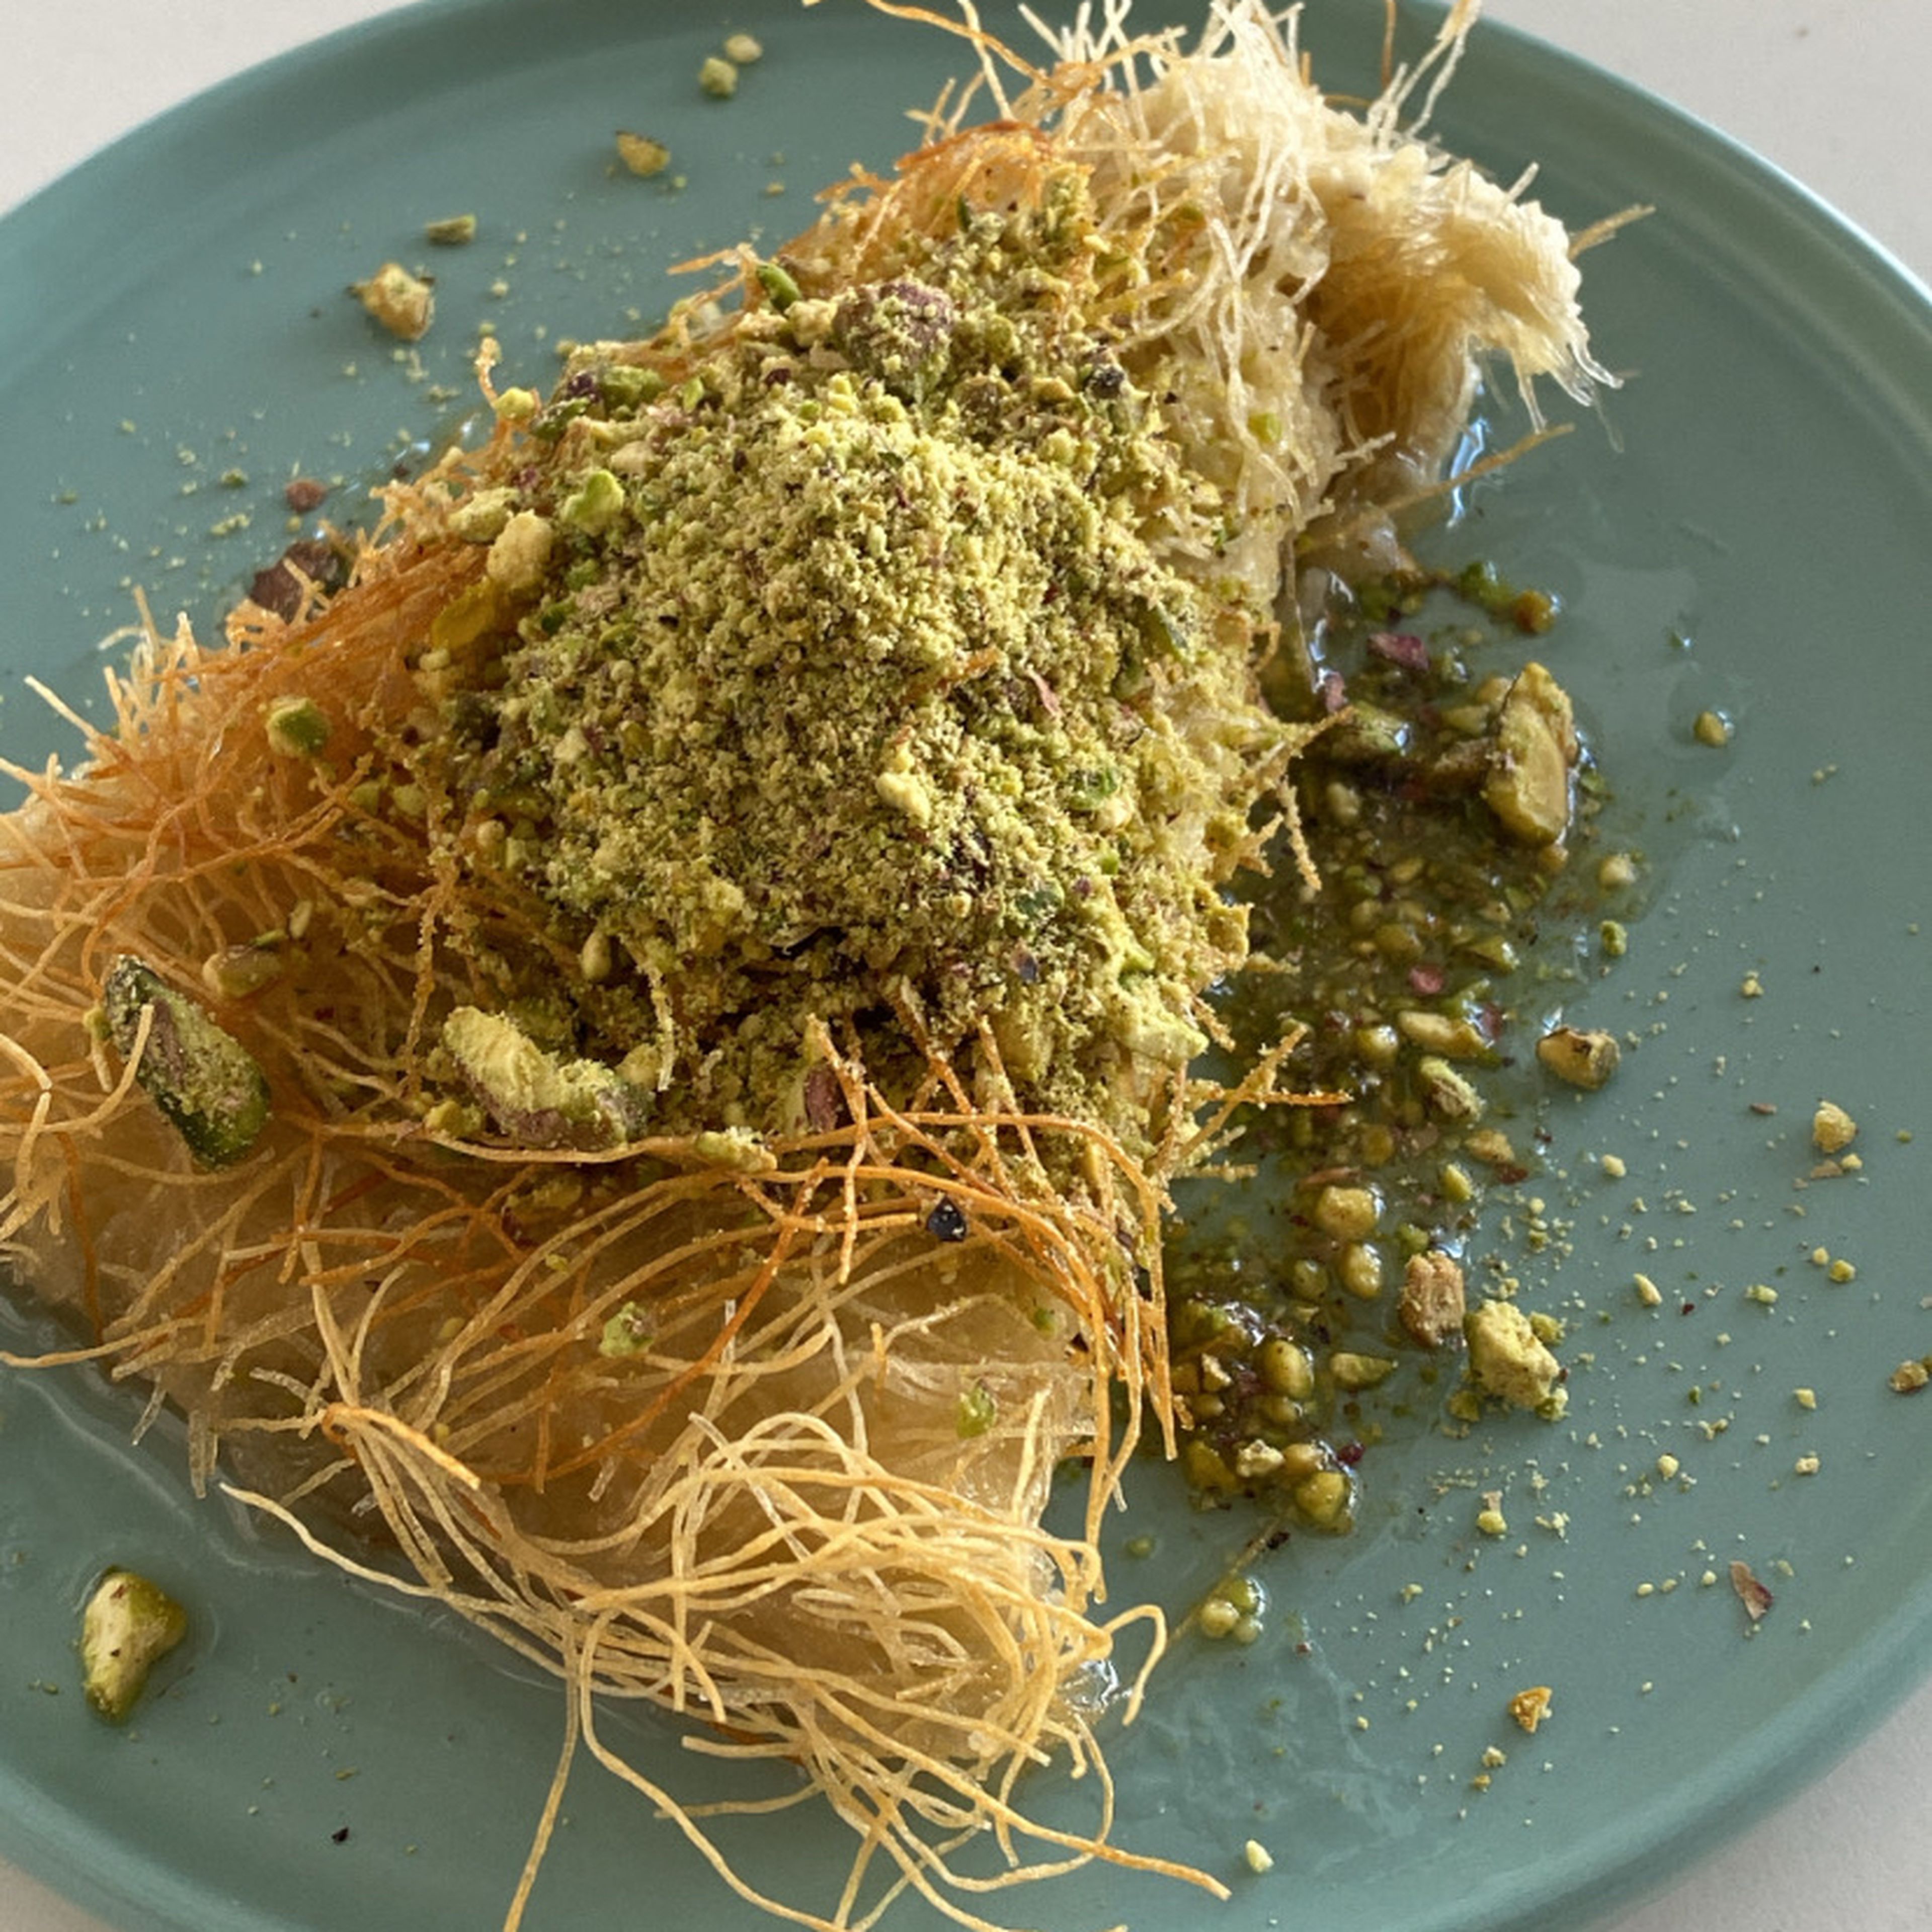 Slice your knafeh, add some pistachios and enjoy!